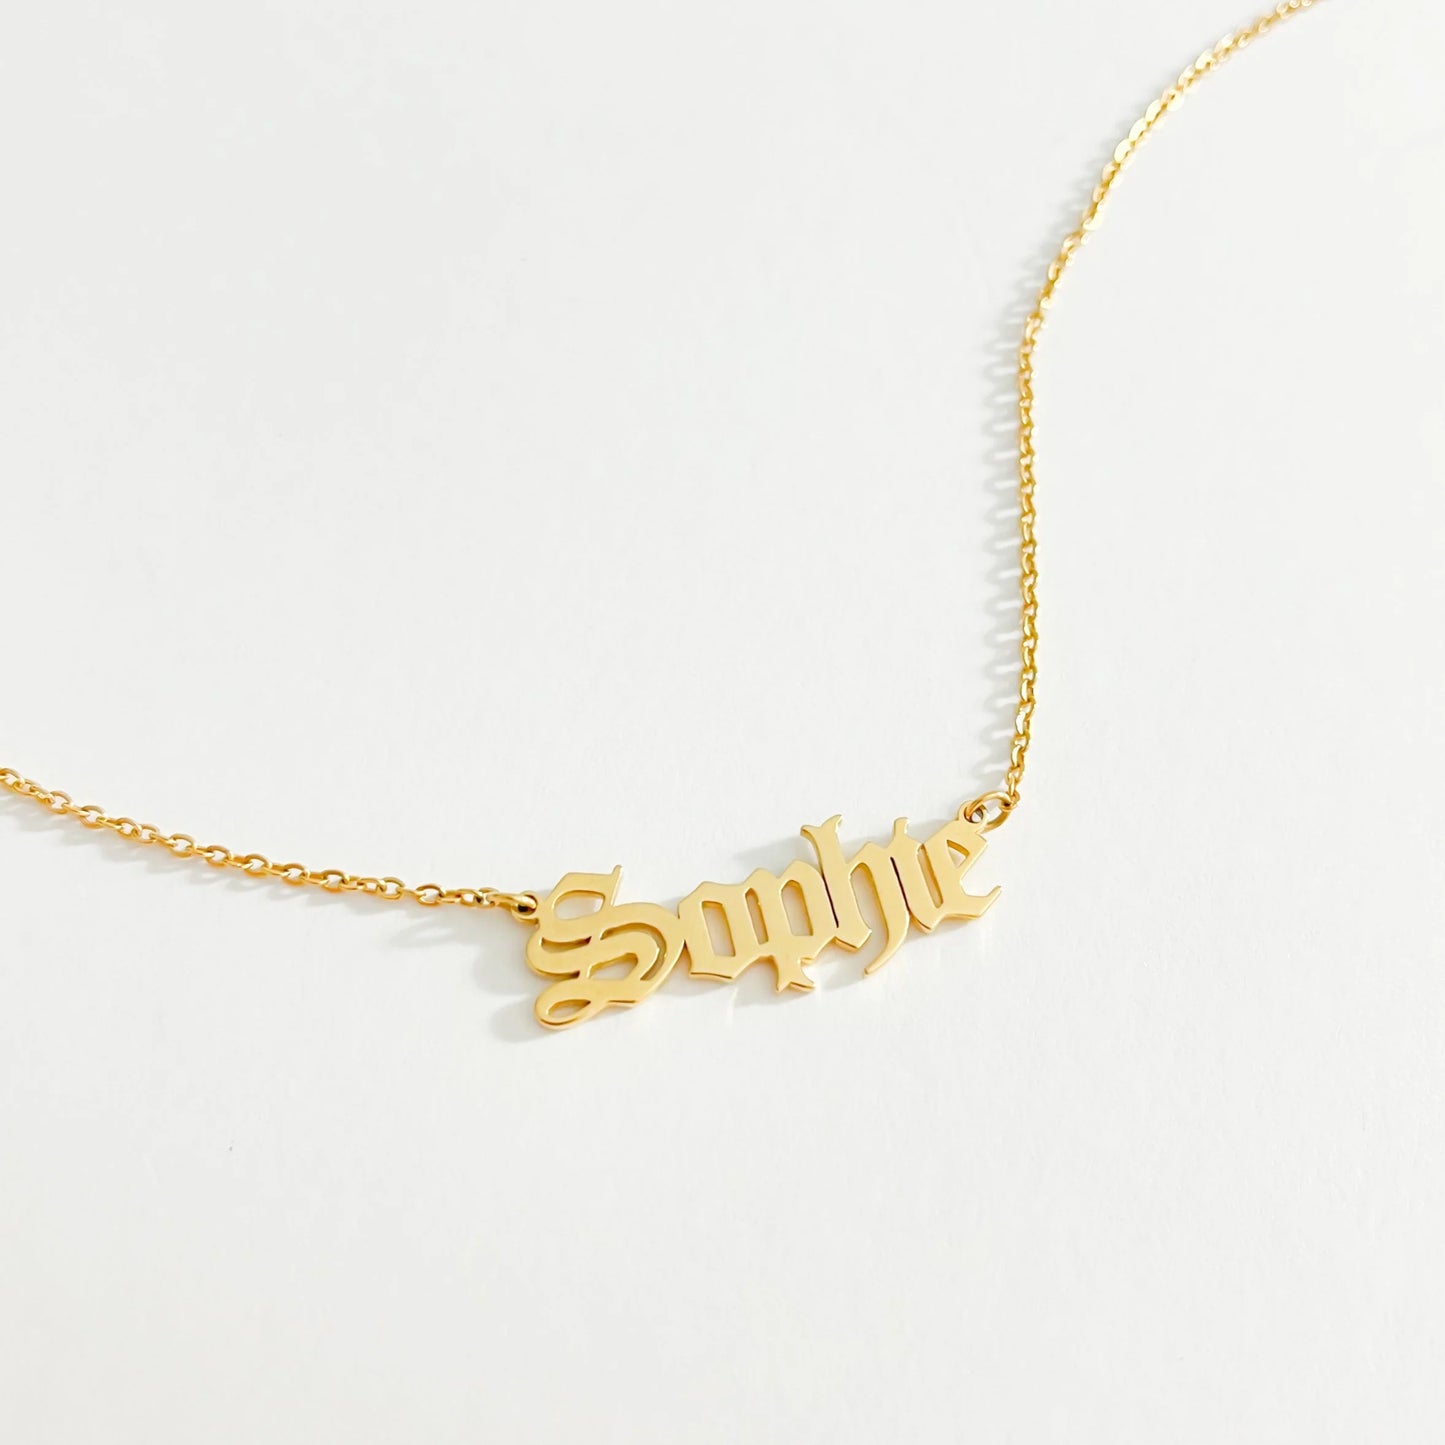 Gold plated stainless steel old English name chain